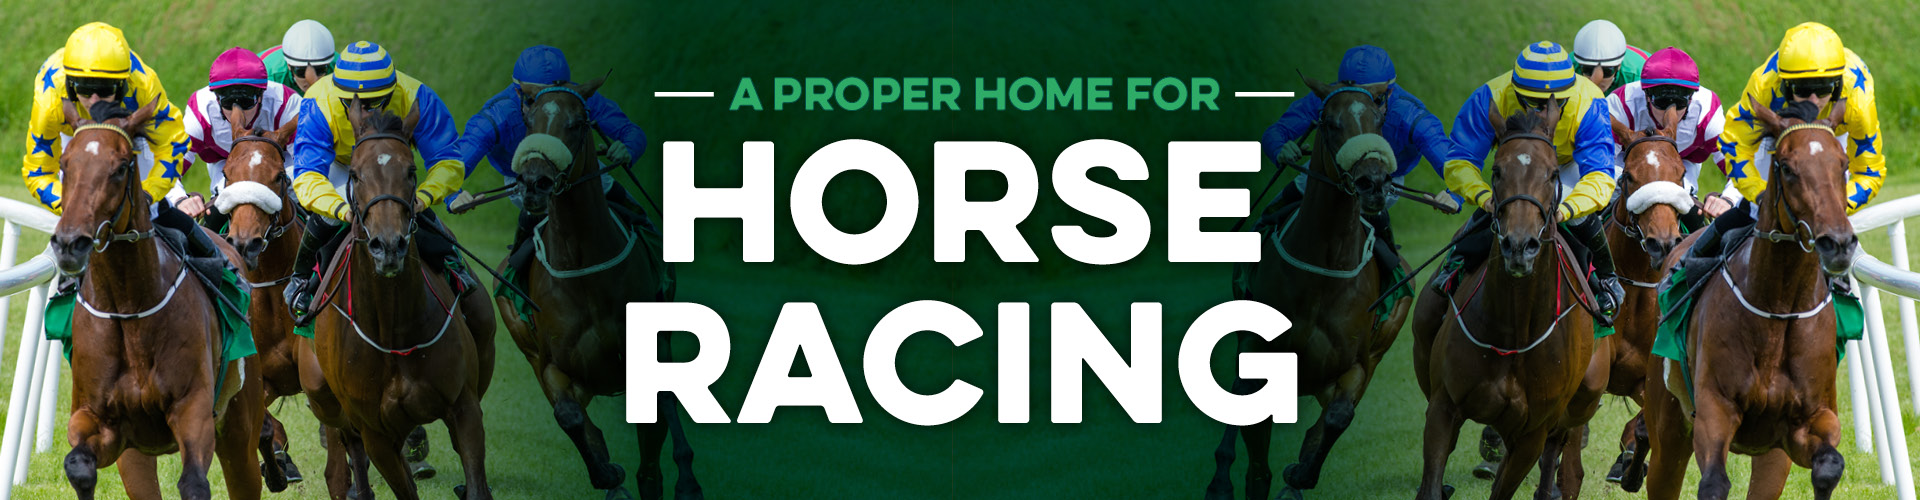 Watch horse racing live at The Queens Head pub